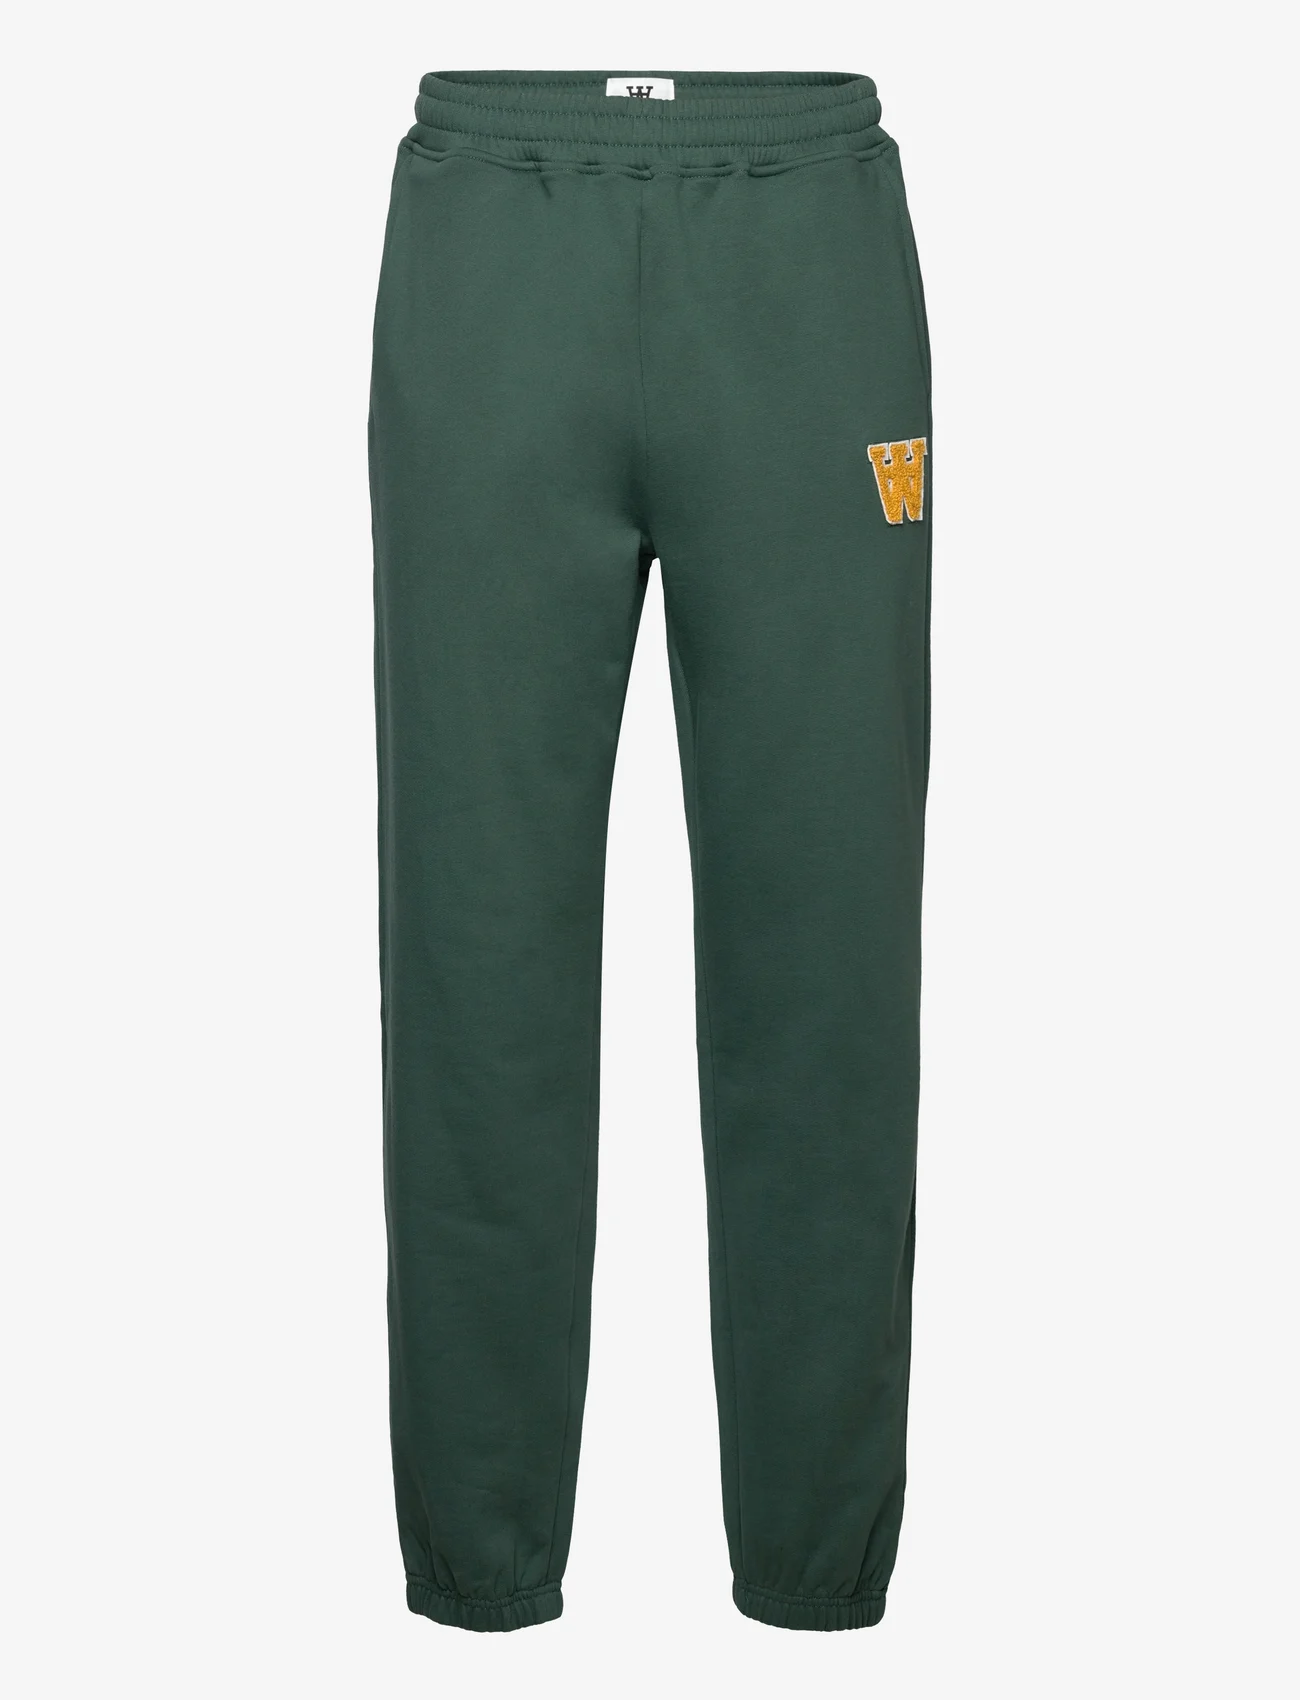 Double A by Wood Wood - Cal joggers - men - forest green - 0